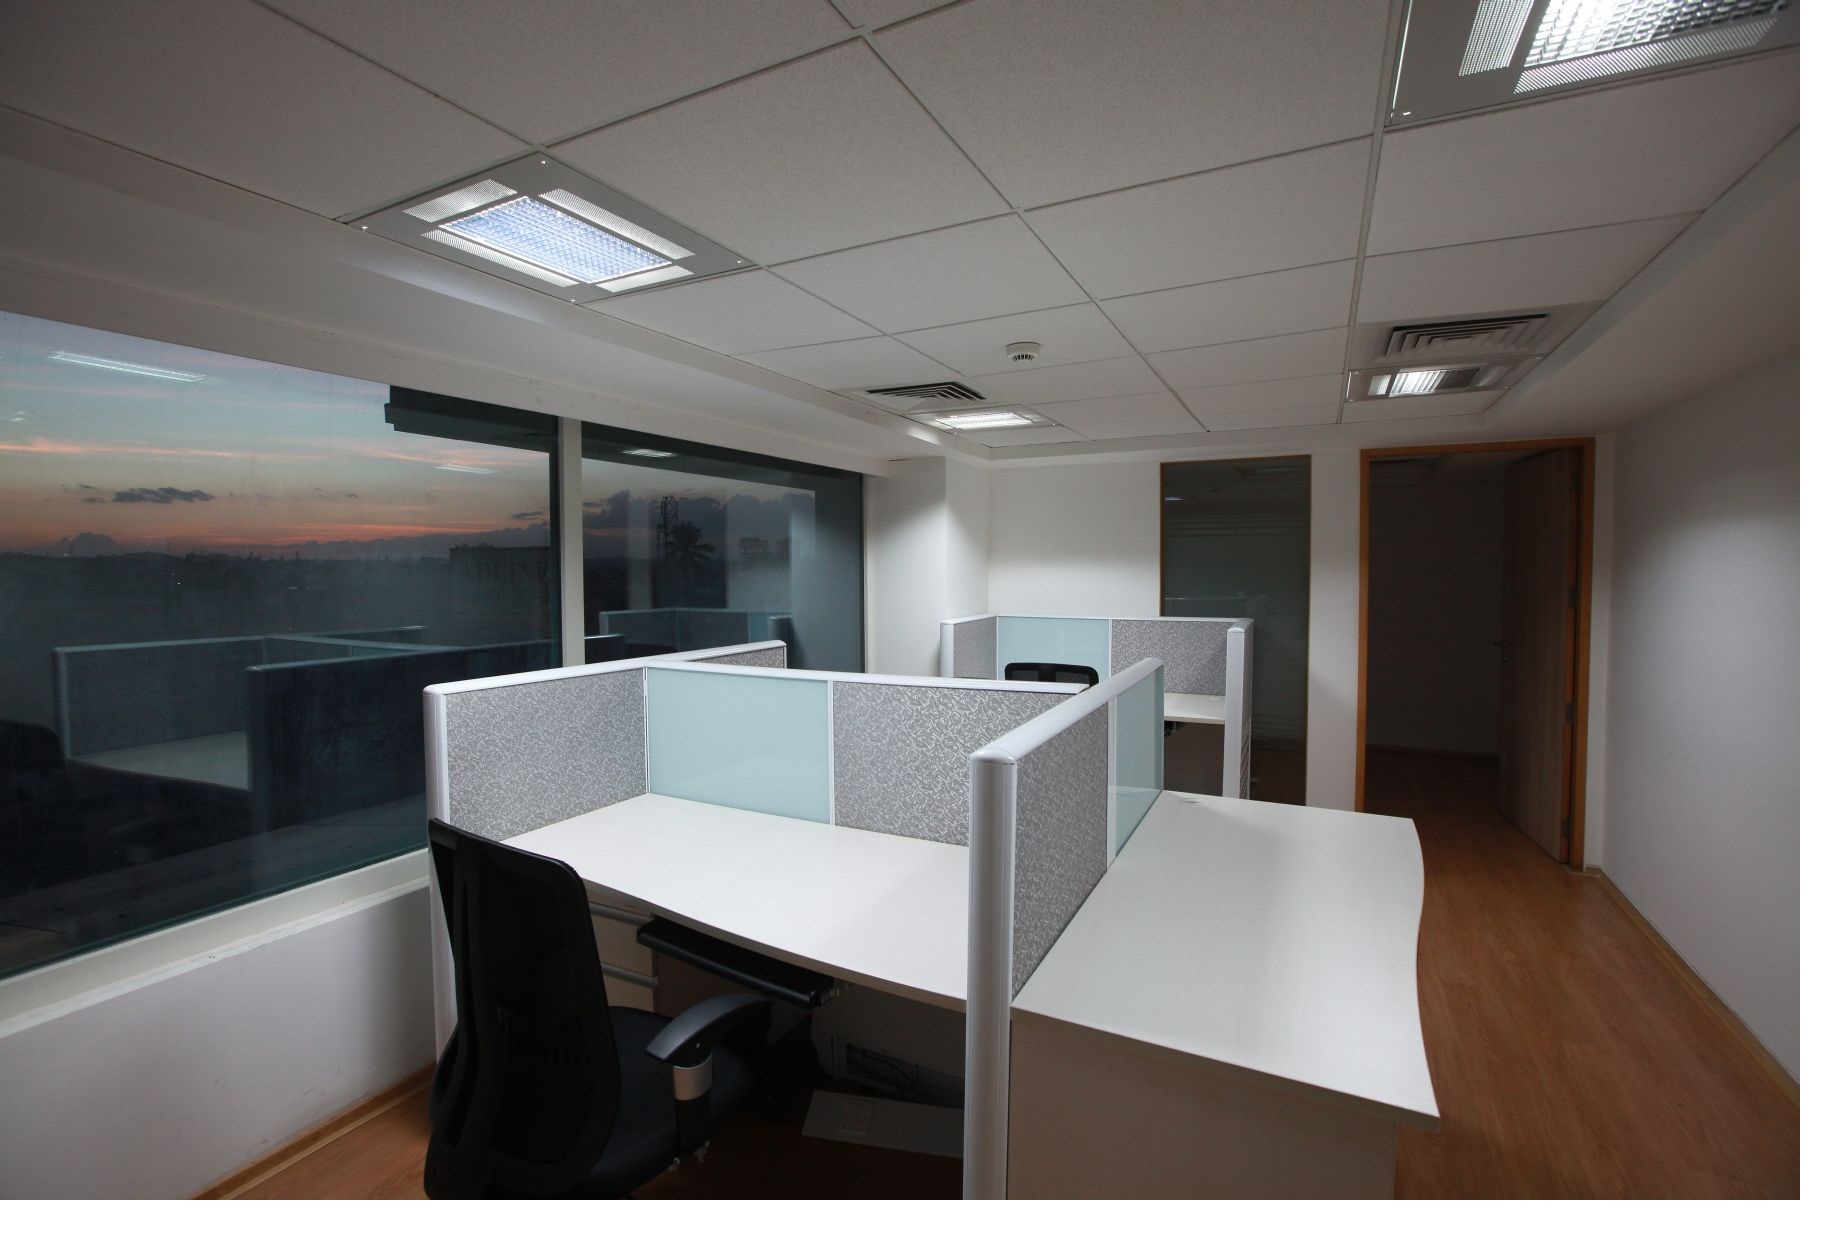 Use an office at your Virtual Office Use of all Meeting Rooms & Offices globally